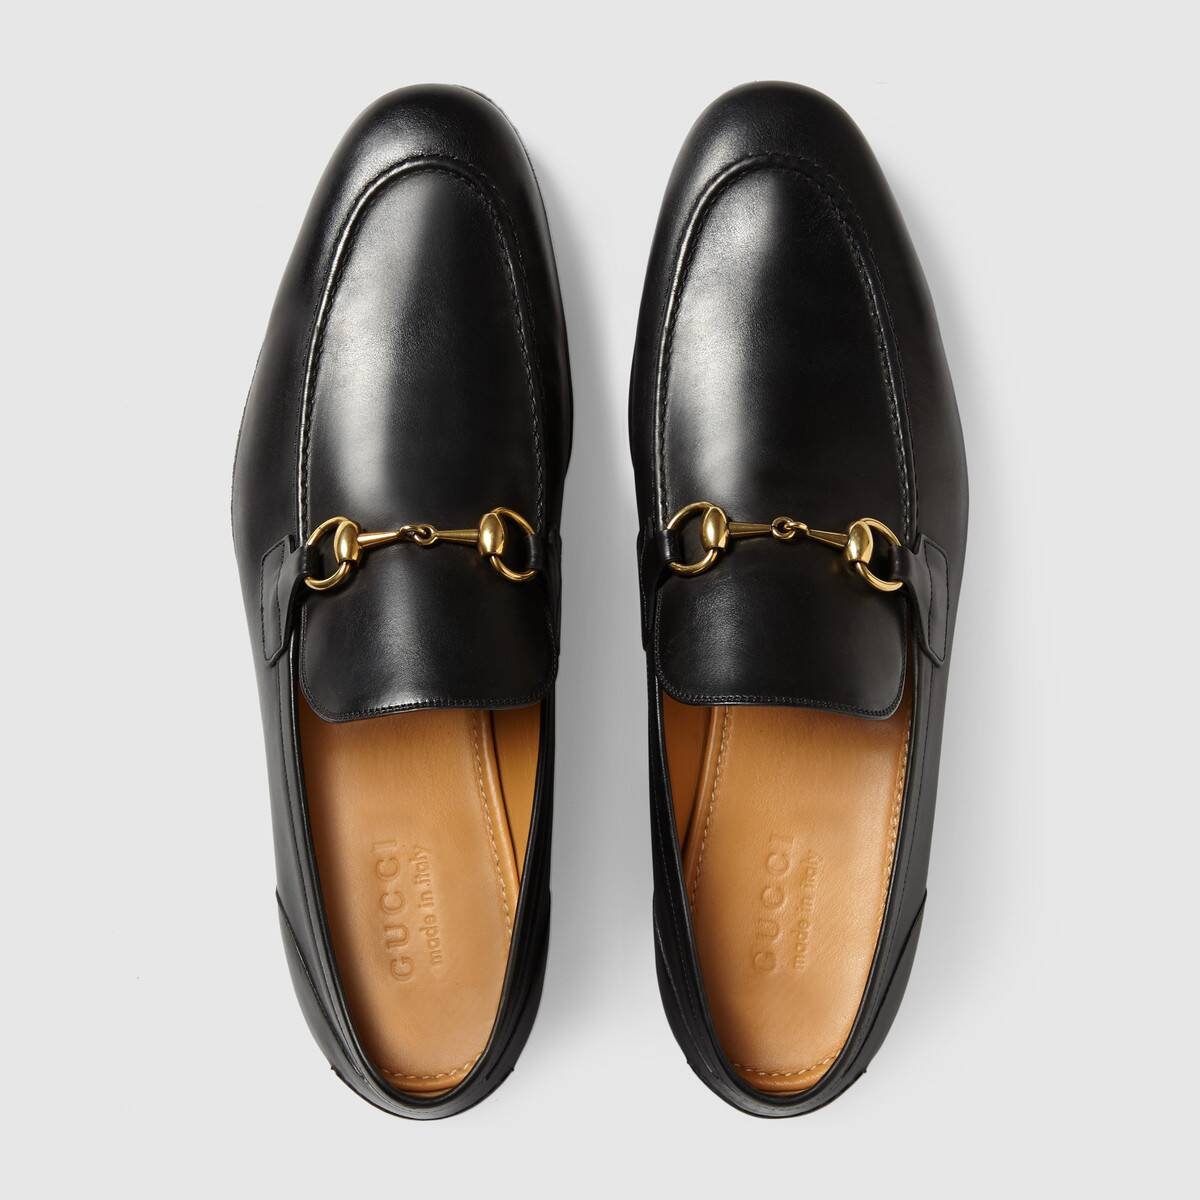 Gucci Jordaan leather loafer - 3